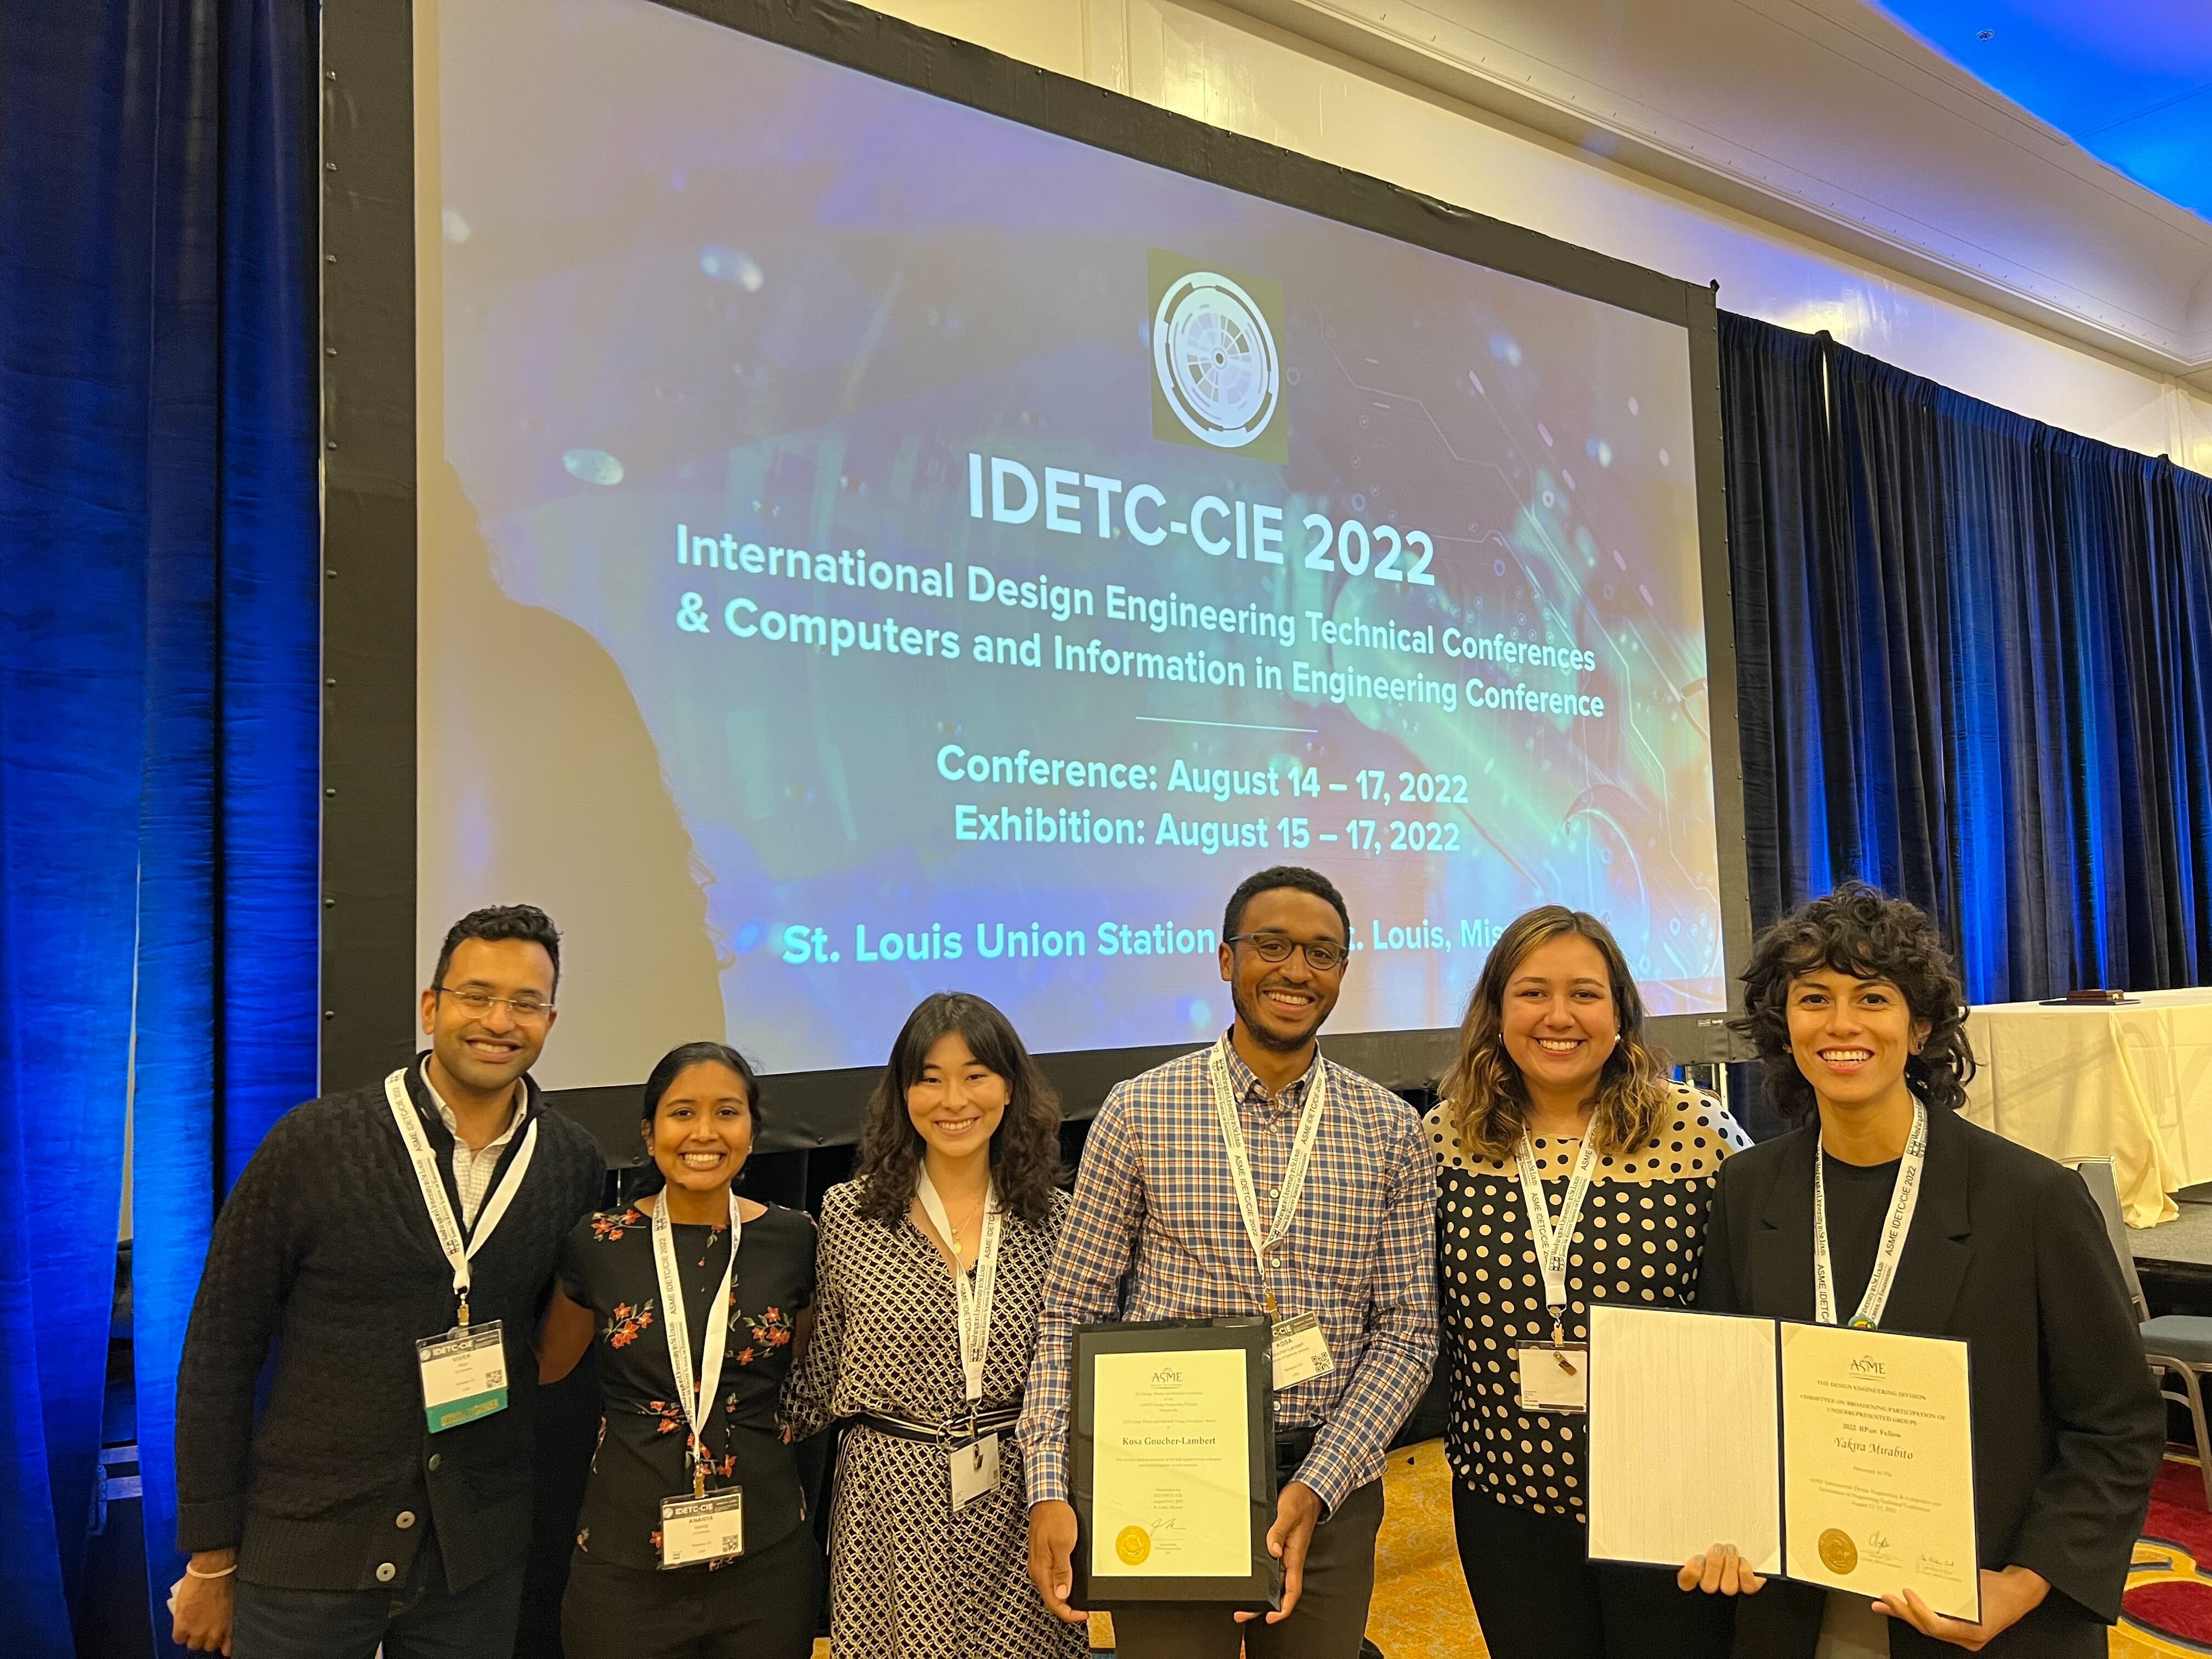 from left to right, Vivek, me (Ananya), Elisa, Kosa (with award plaque), Nicole, and Yakira (with certificate) in front of projector screen with the IDETC conference name on it